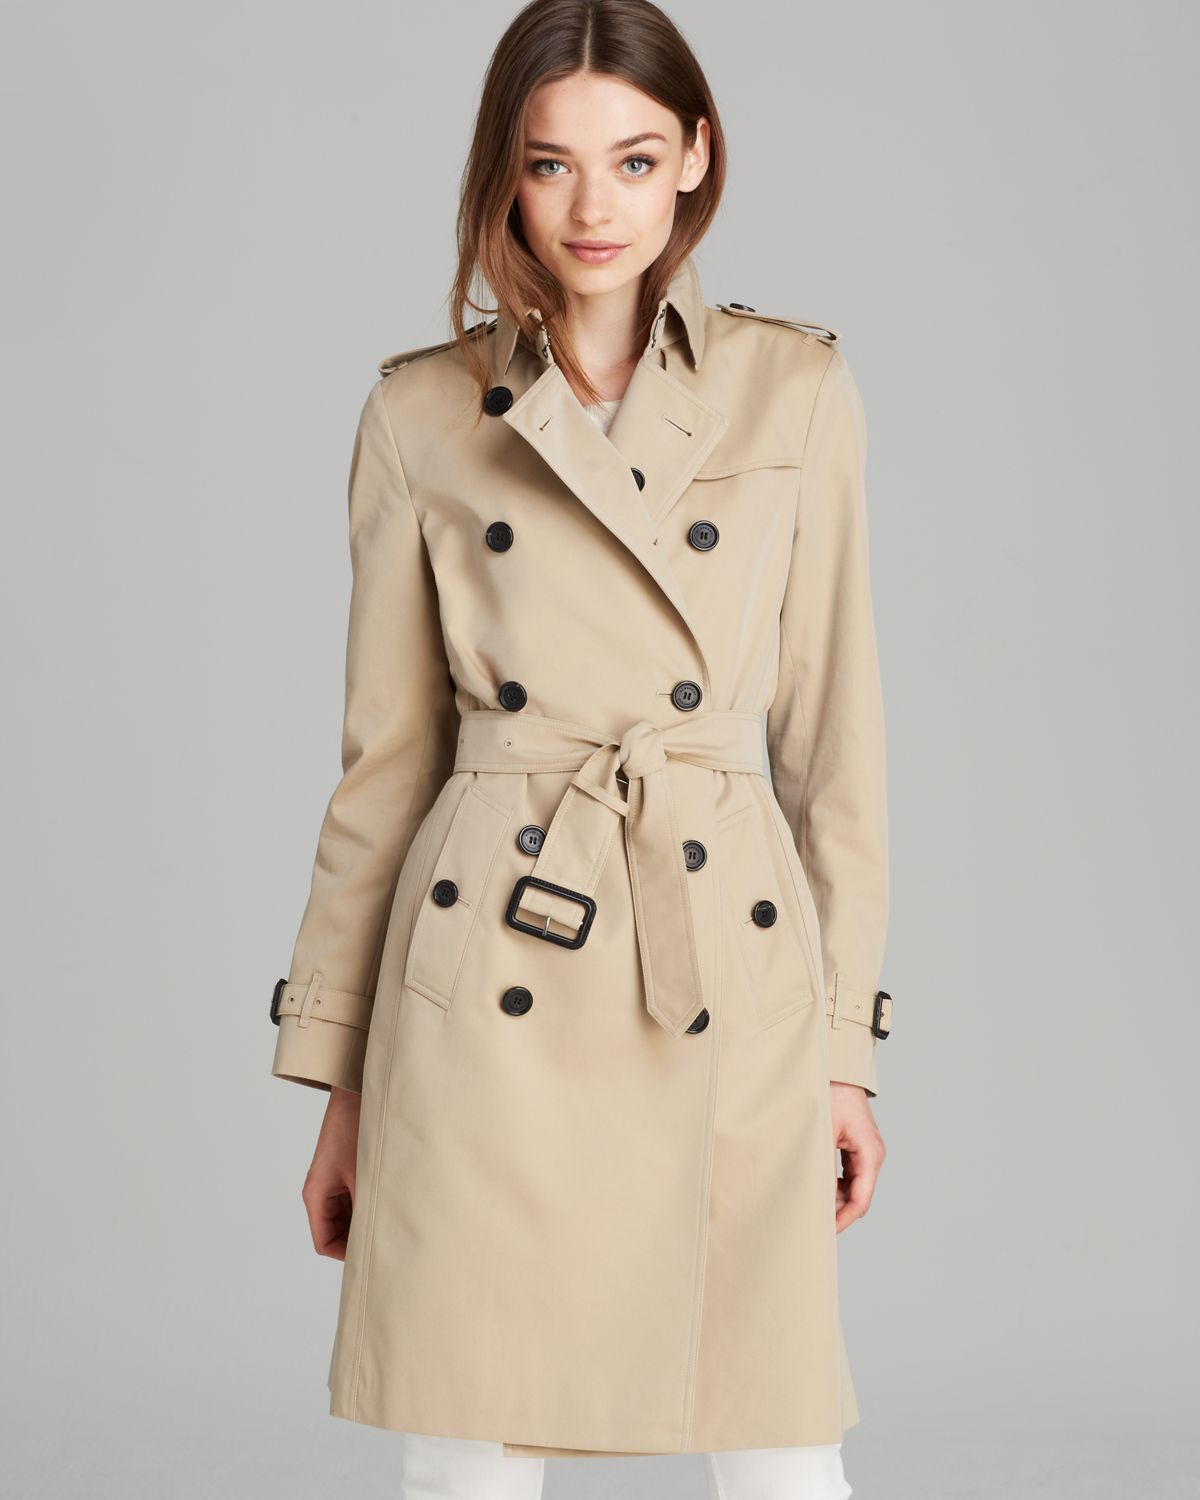 burberry womens trench coat size chart